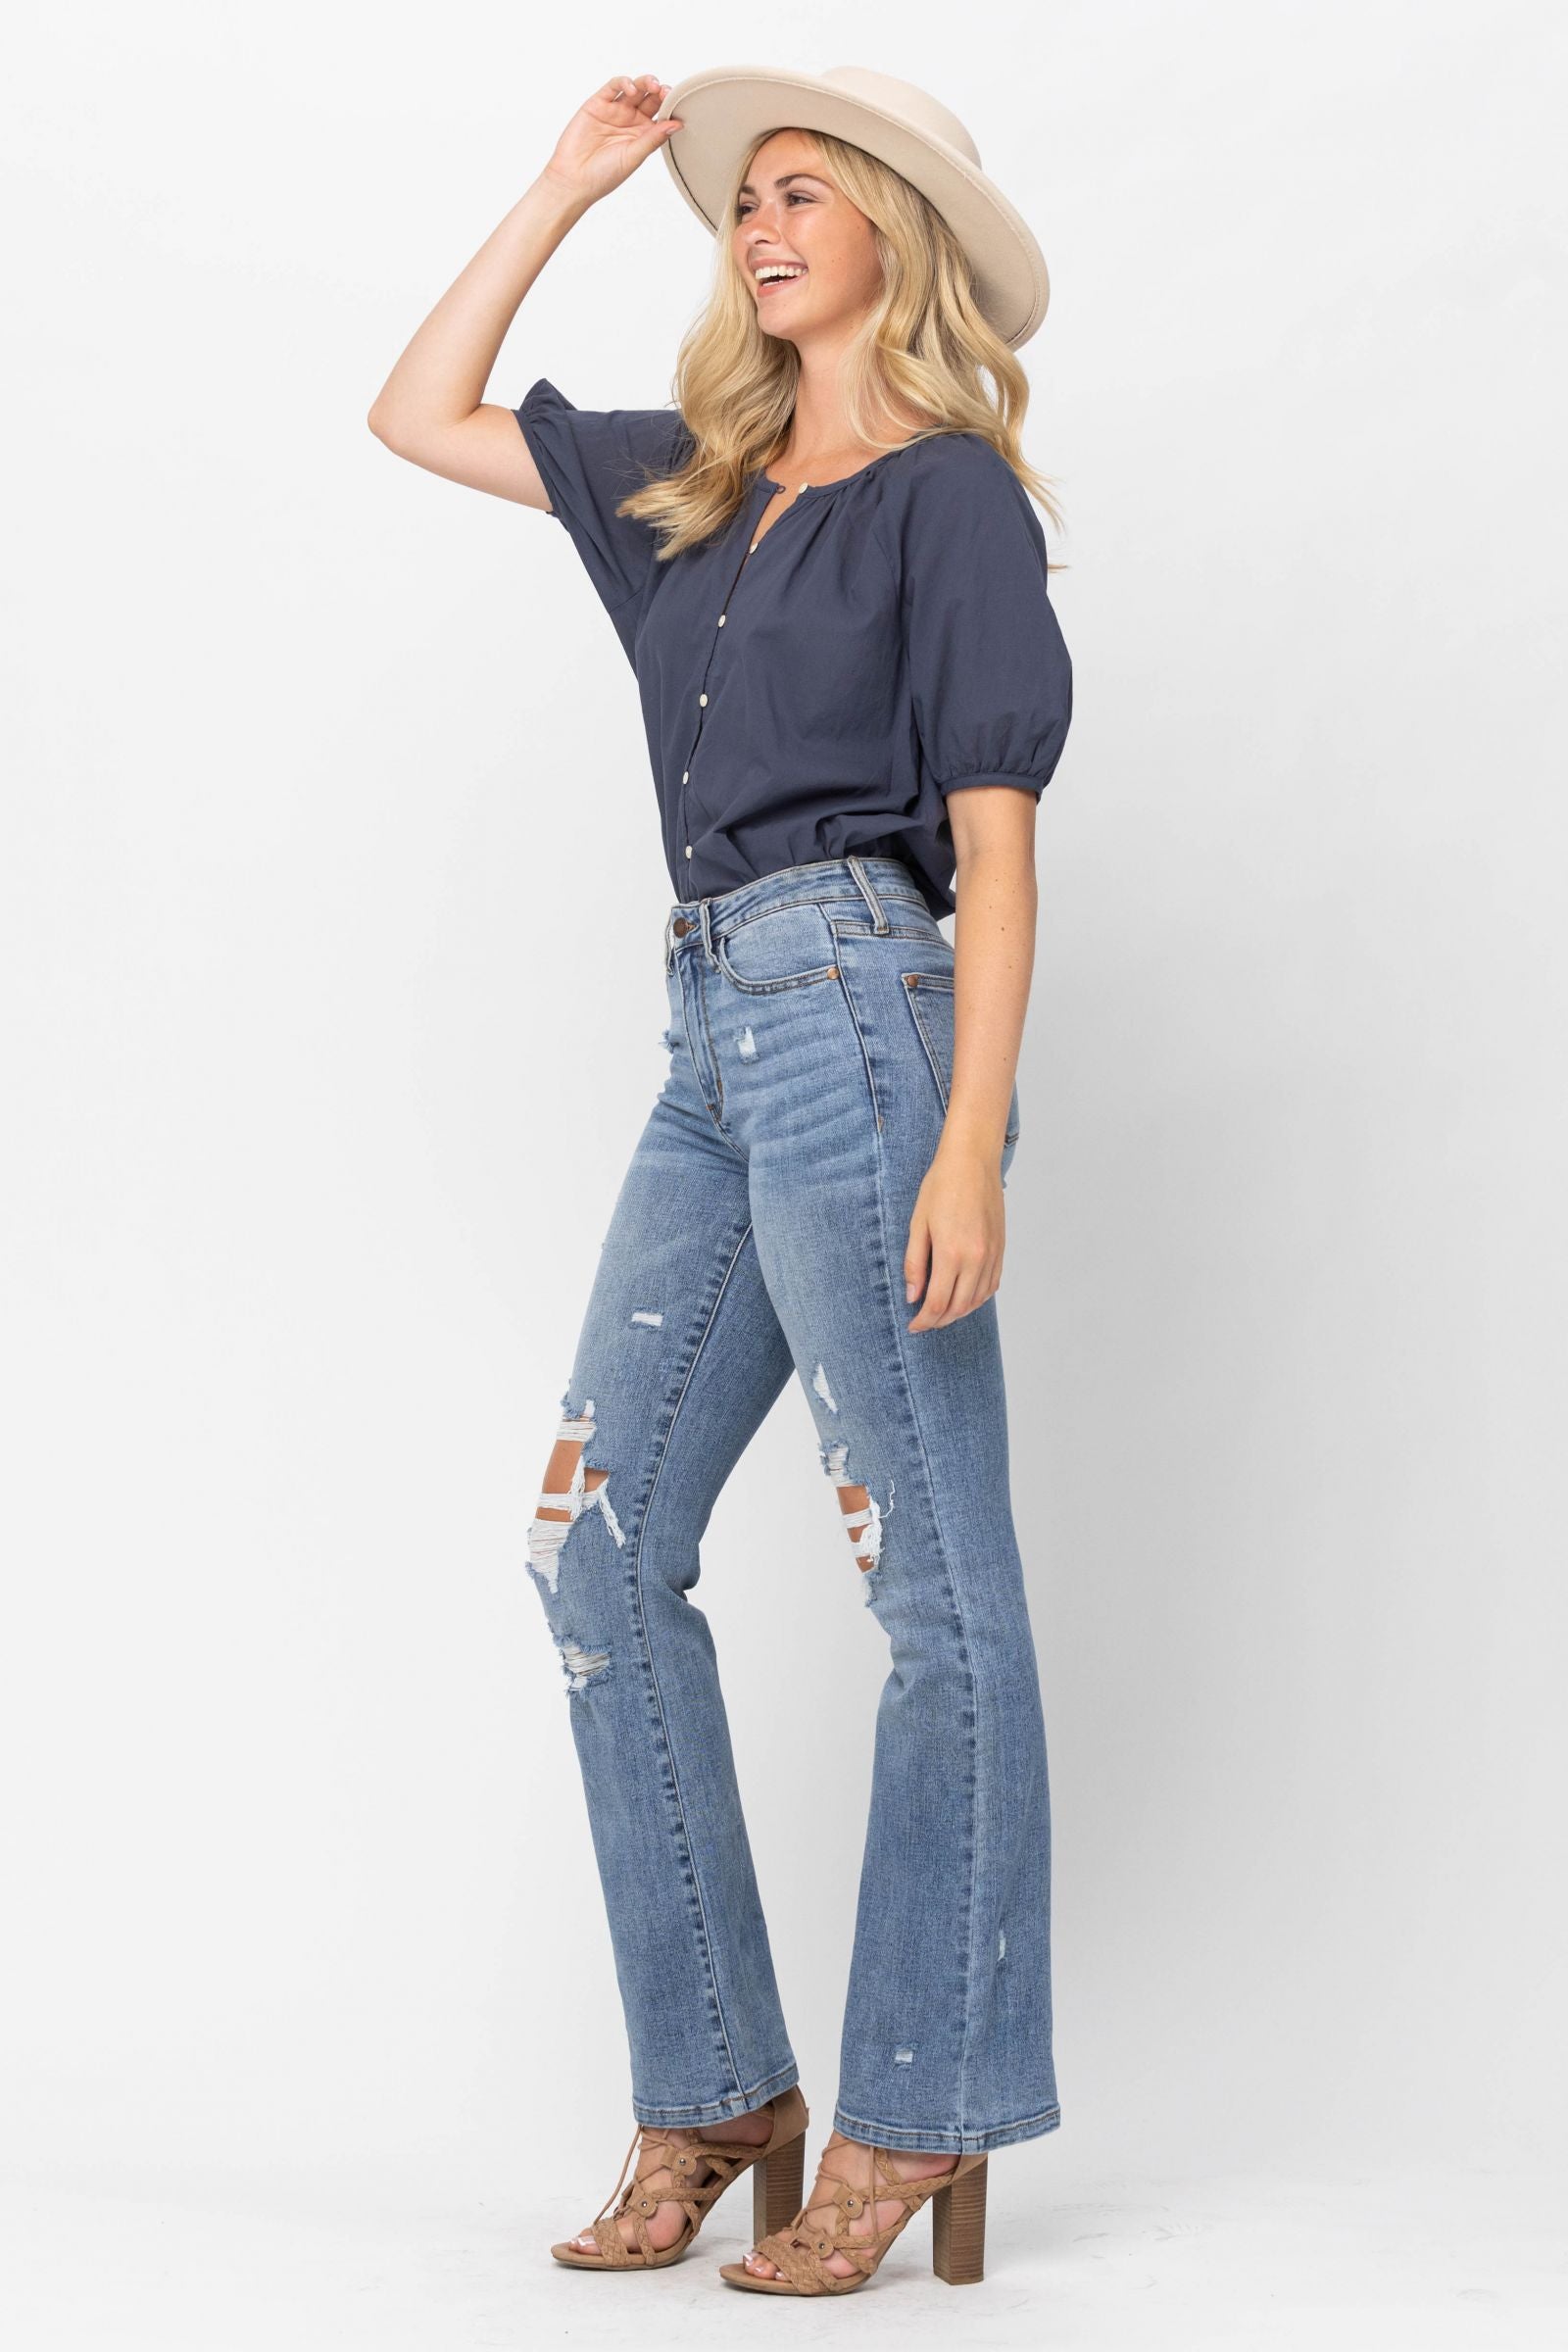 Buy Space Blue Stone Washed Jeans Online in India -Beyoung